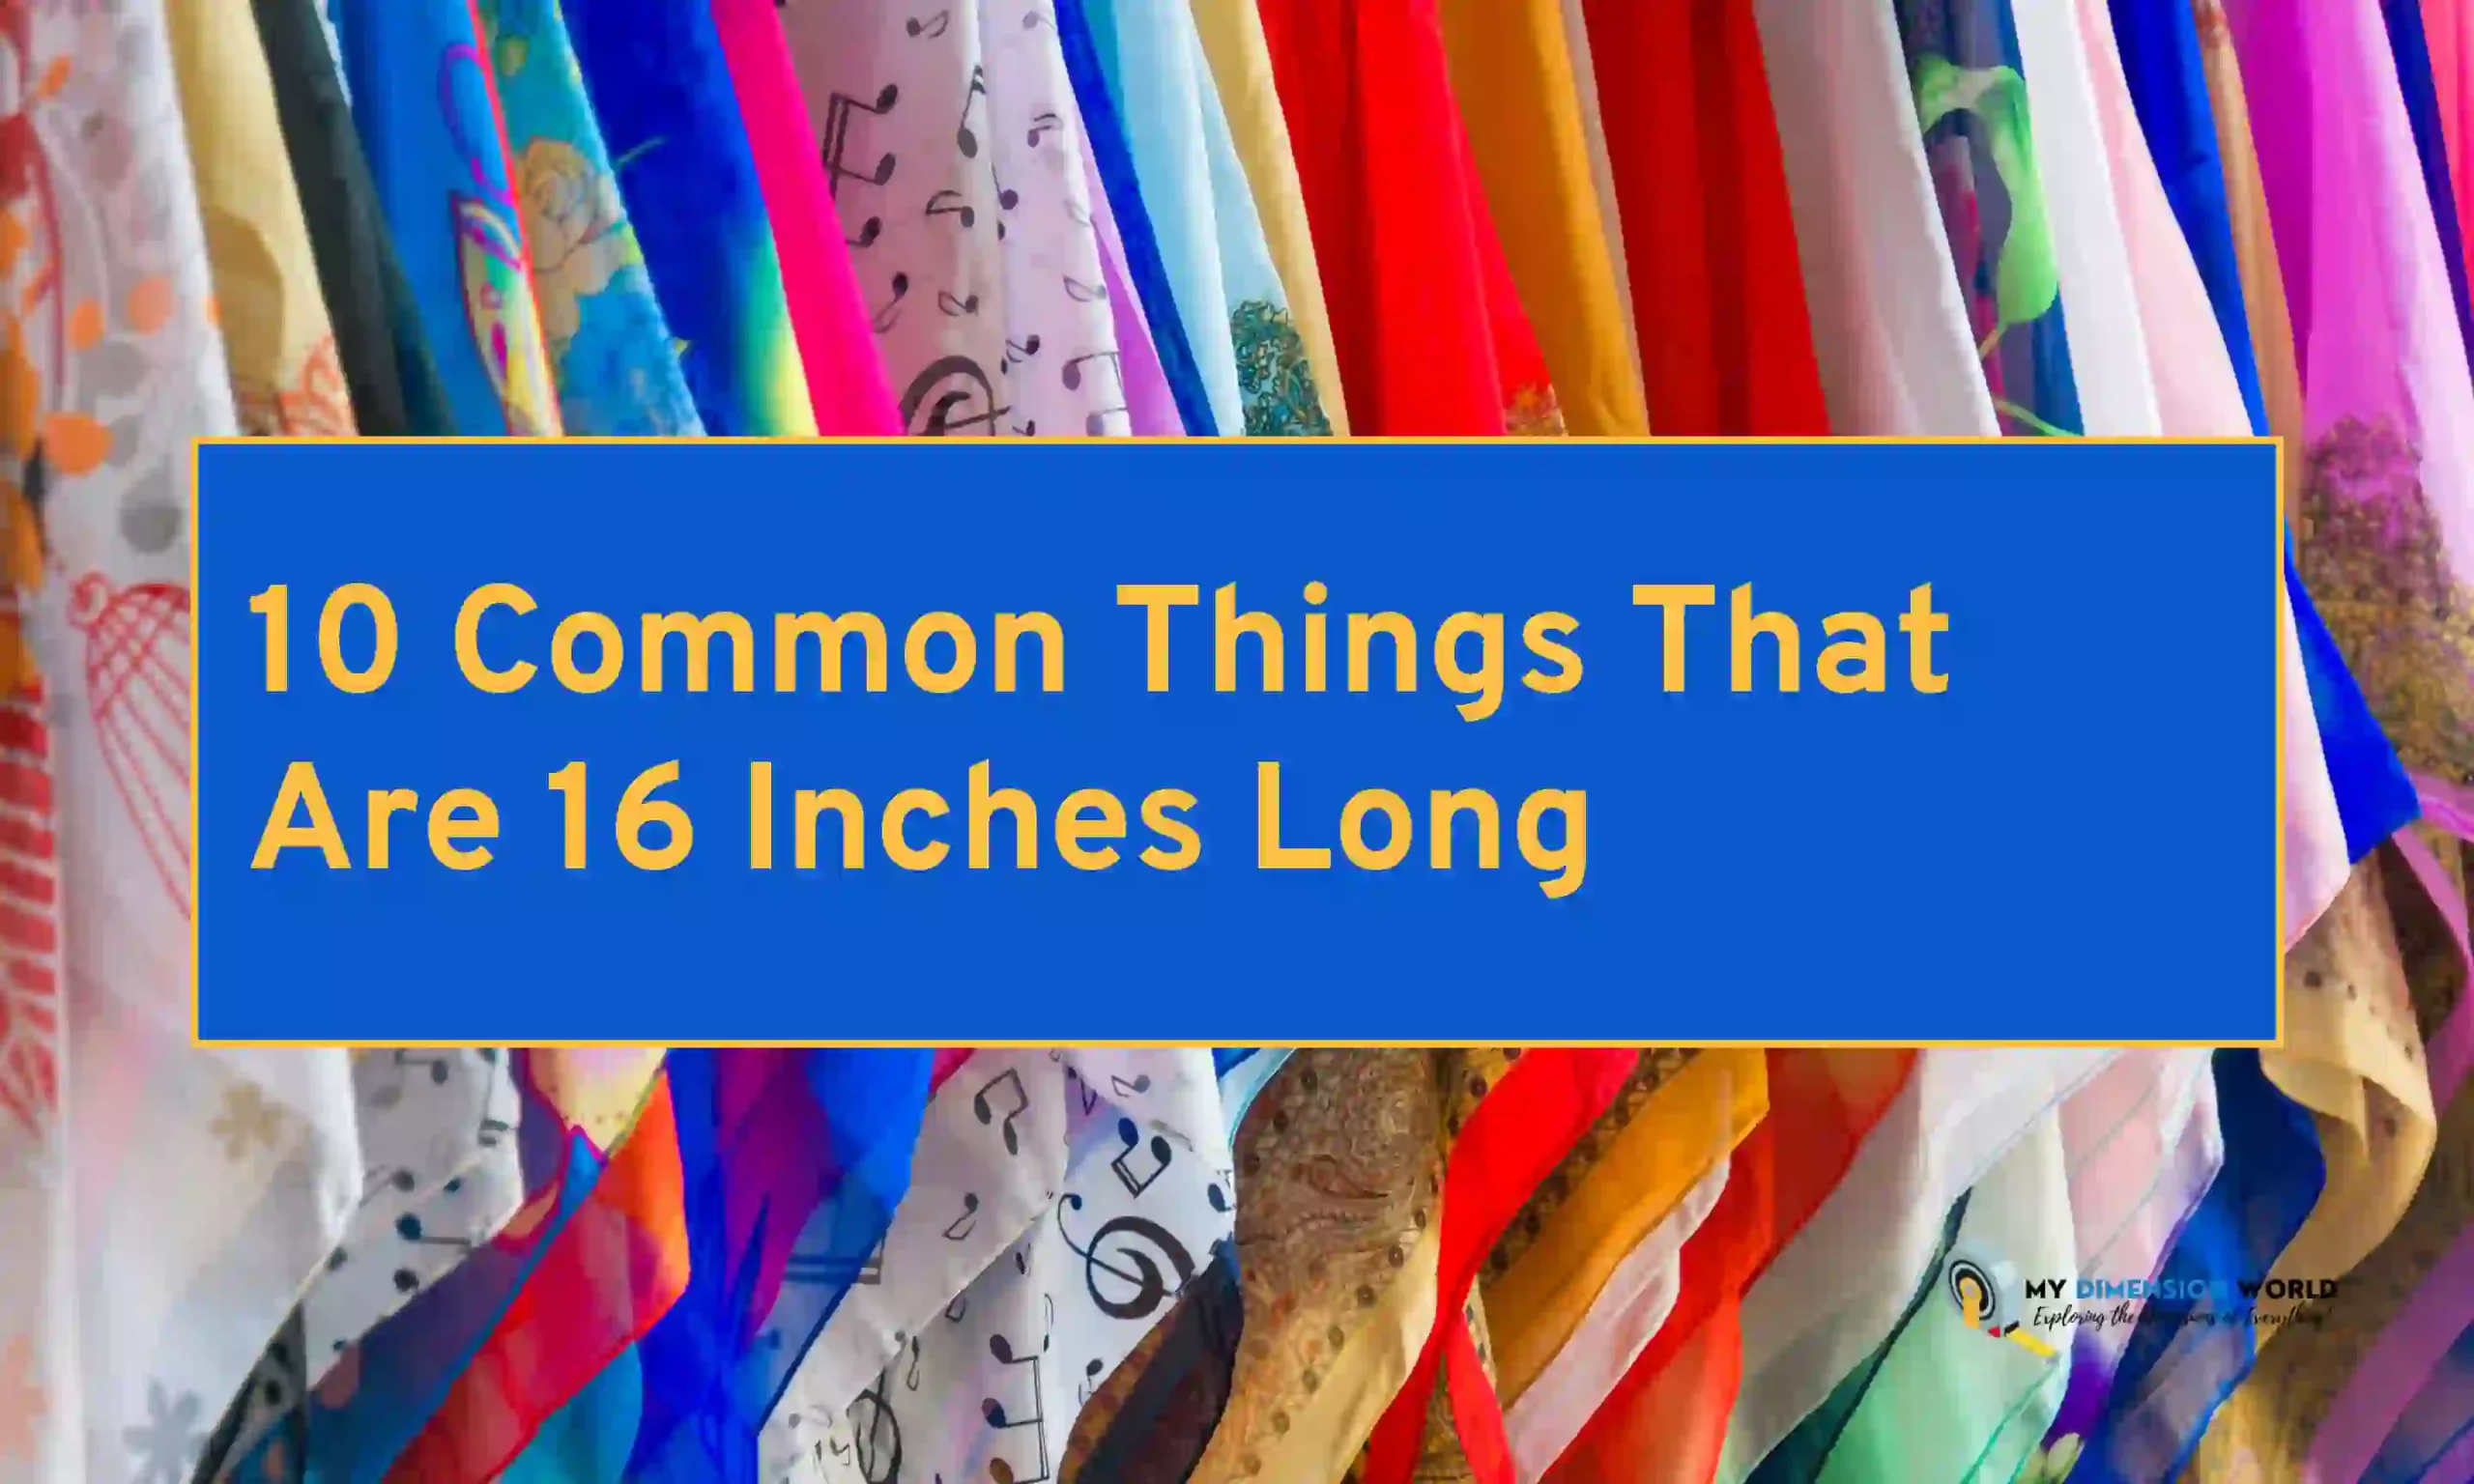 10 Common Things That Are 16 Inches Long